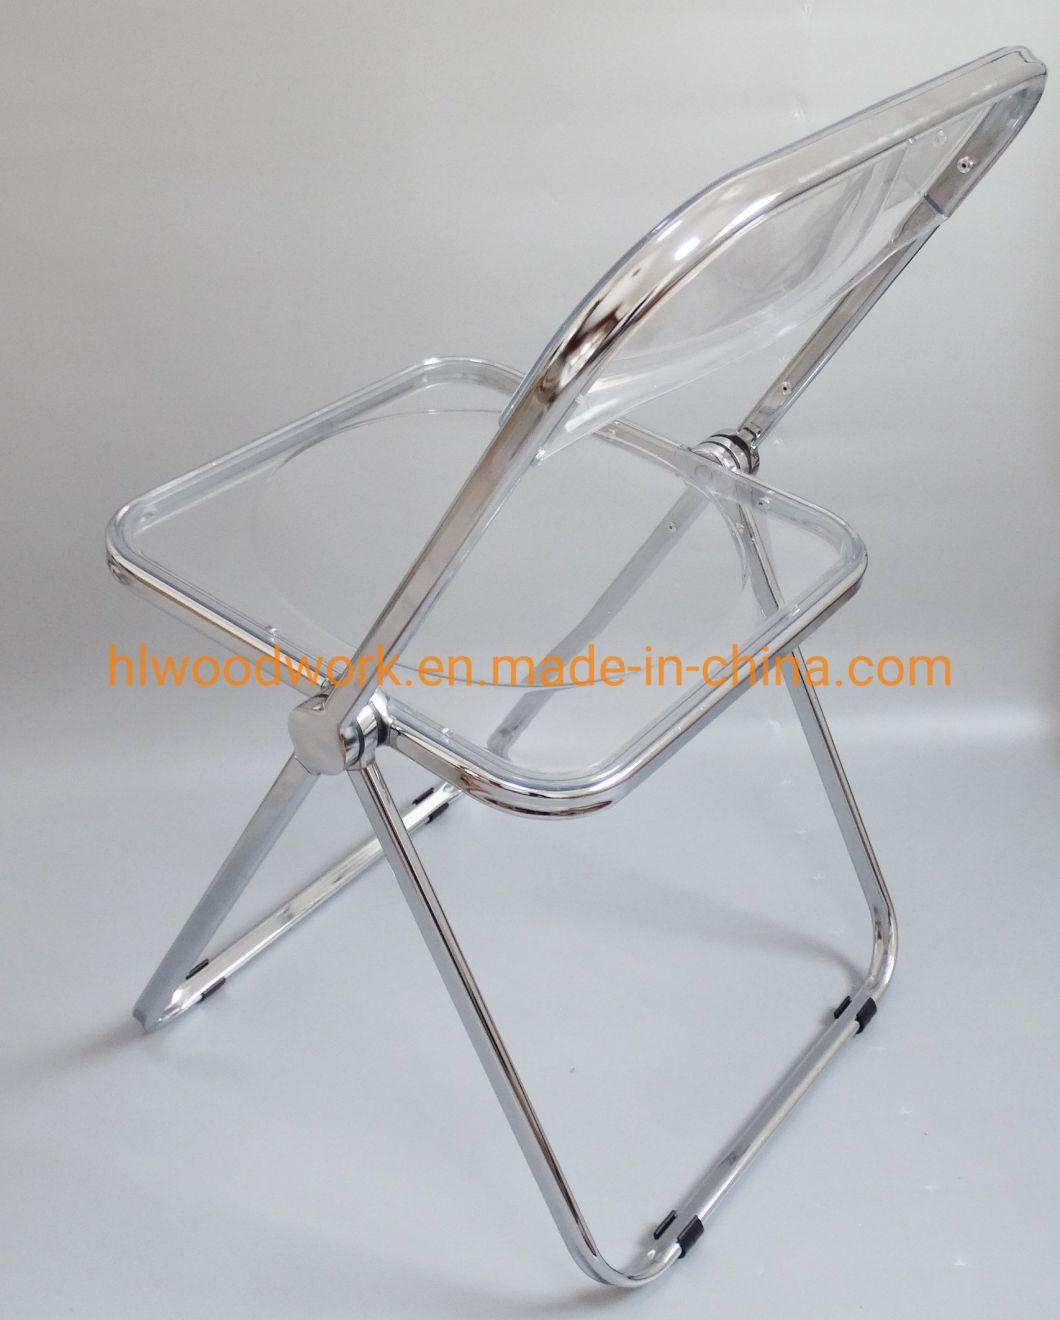 Modern Transparent Brown Folding Chair PC Plastic Outdoor Chair Chrome Frame Office Bar Dining Leisure Banquet Wedding Meeting Chair Plastic Dining Chair